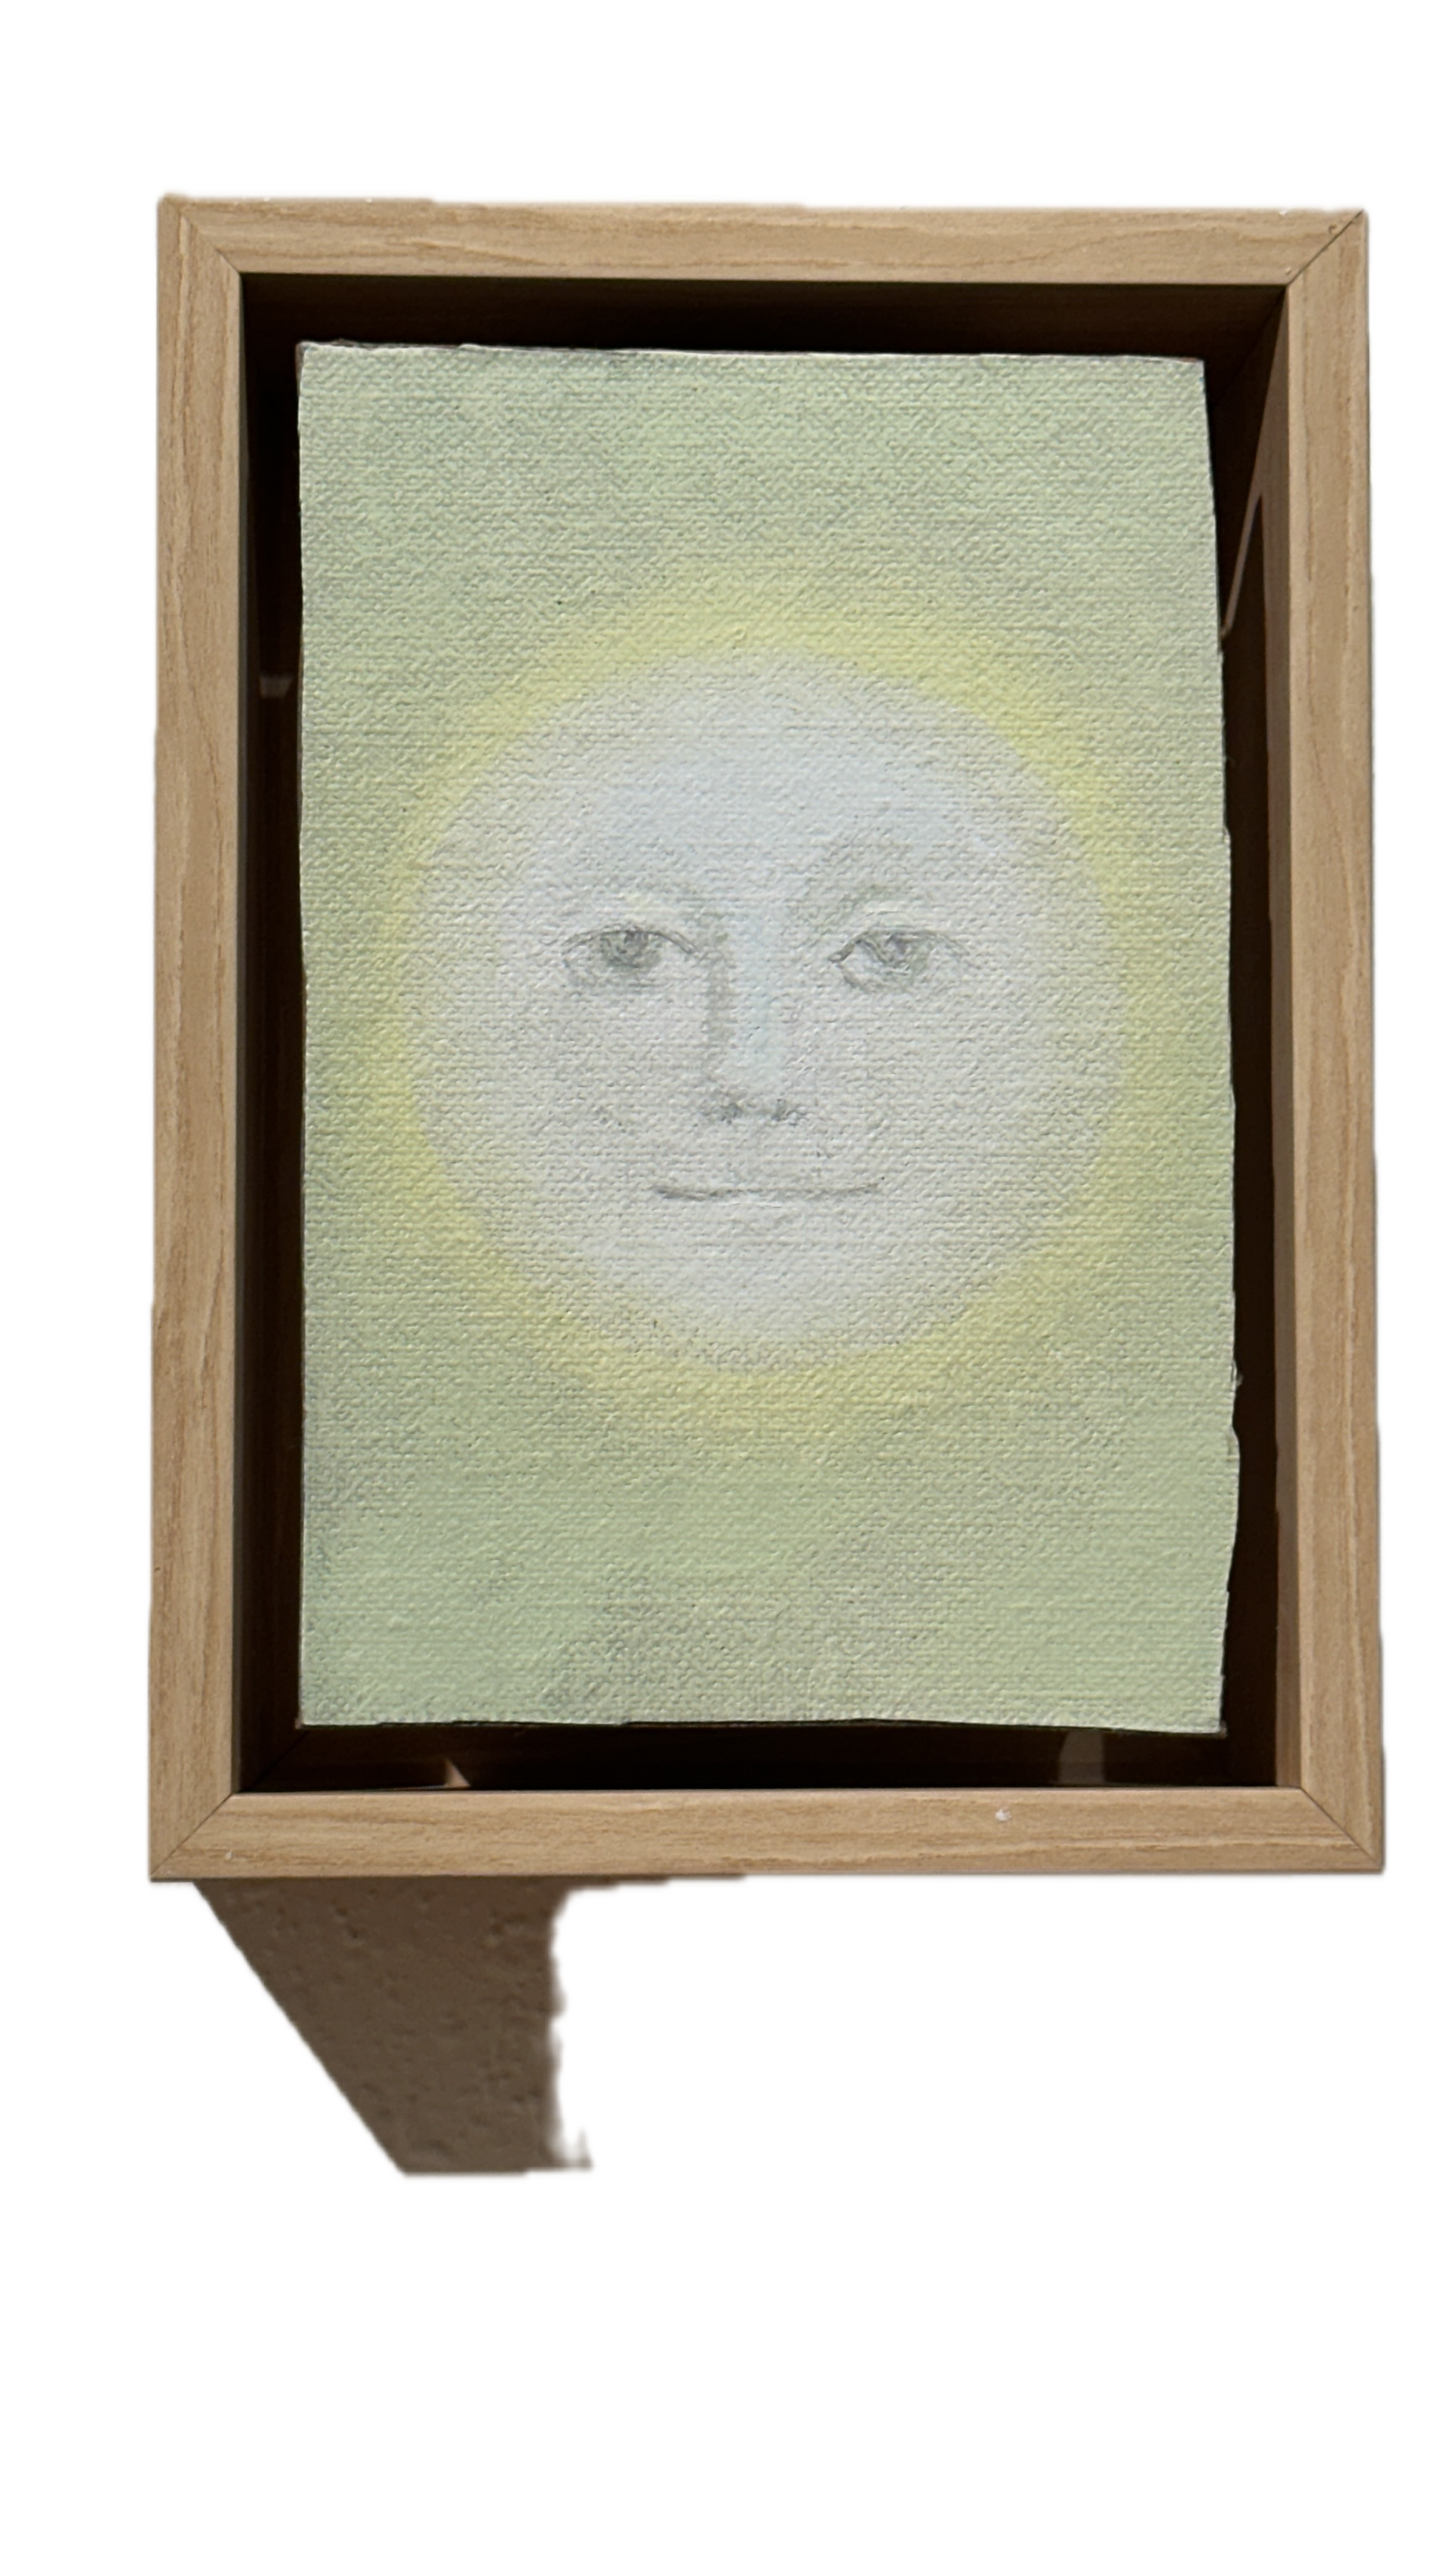 Moonface - pale grey against yellow by Leila McConnell